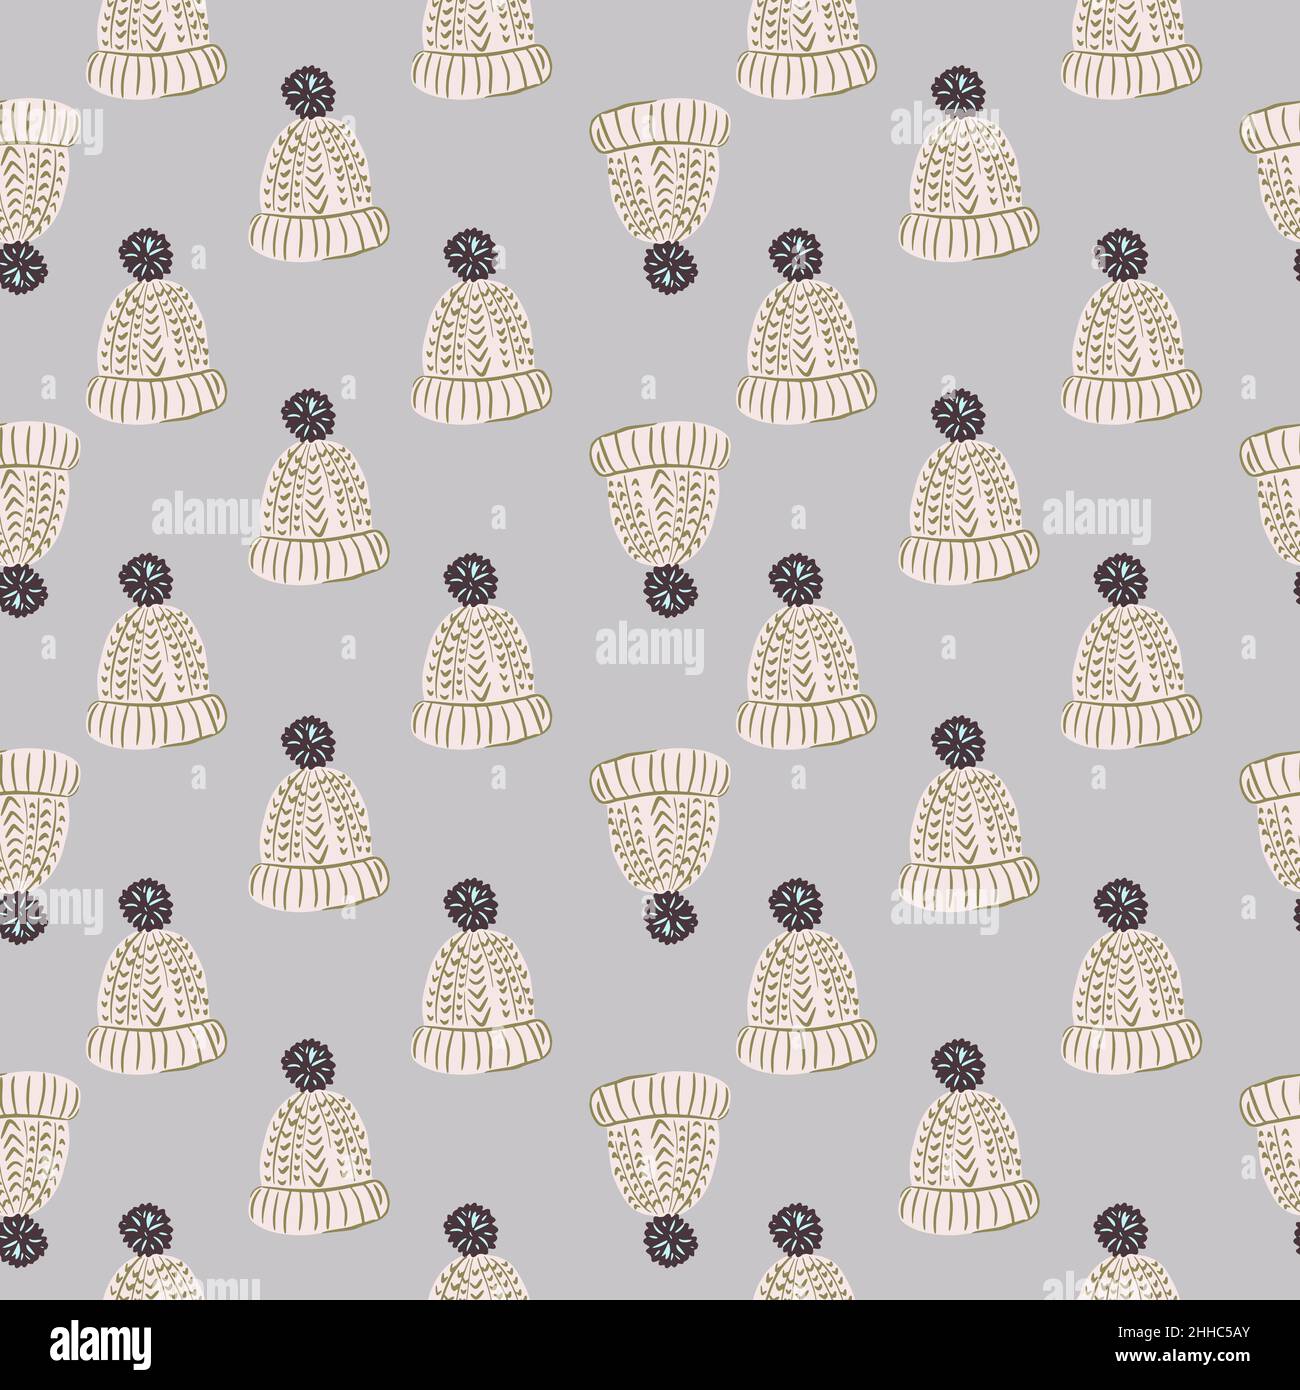 Little grey hand drawn hats seamless winter pattern. Blue background. Pastel tones artwork. Flat vector print for textile, fabric, giftwrap, wallpaper Stock Vector